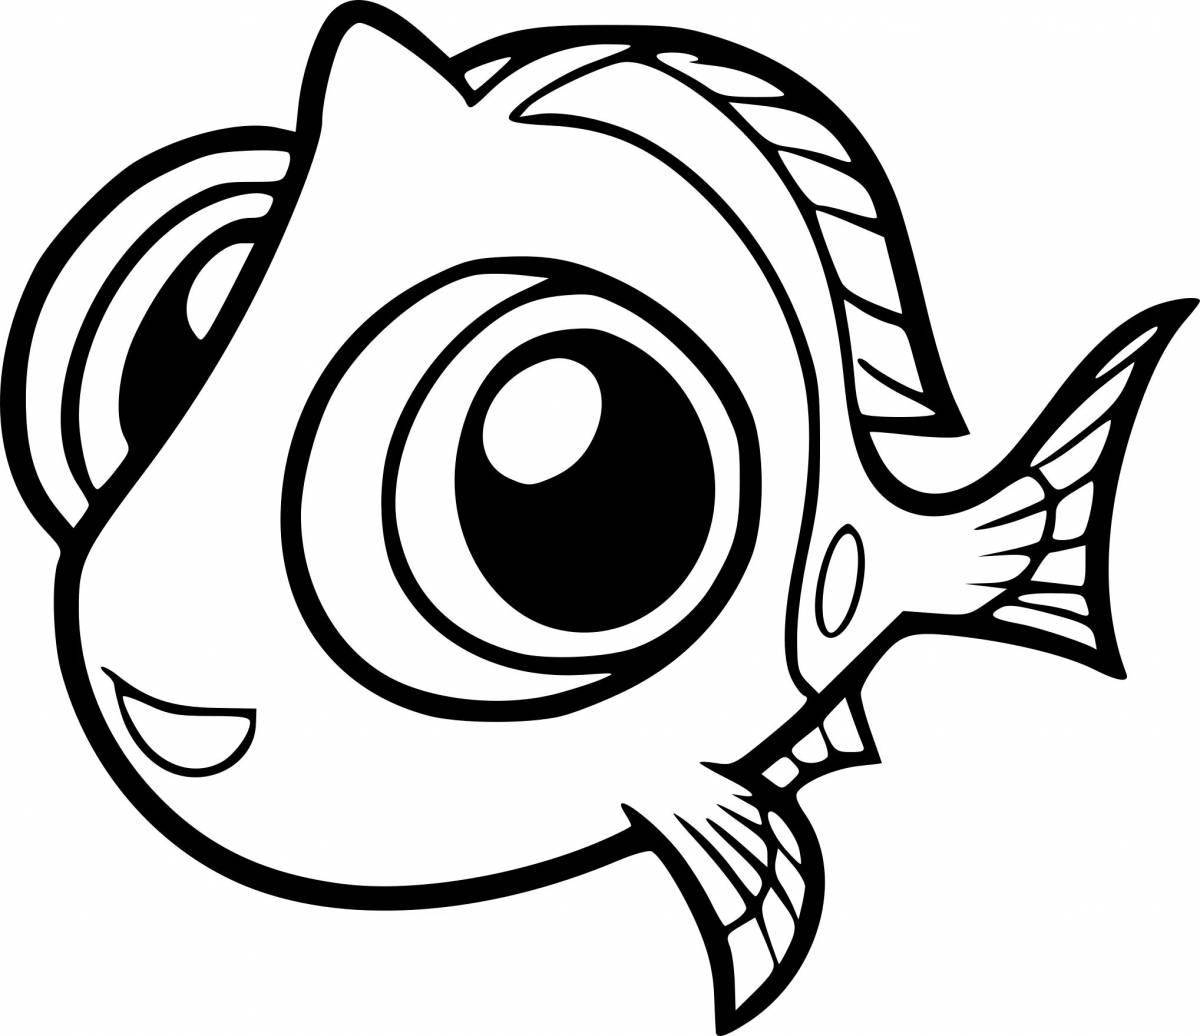 Funny dory fish coloring book